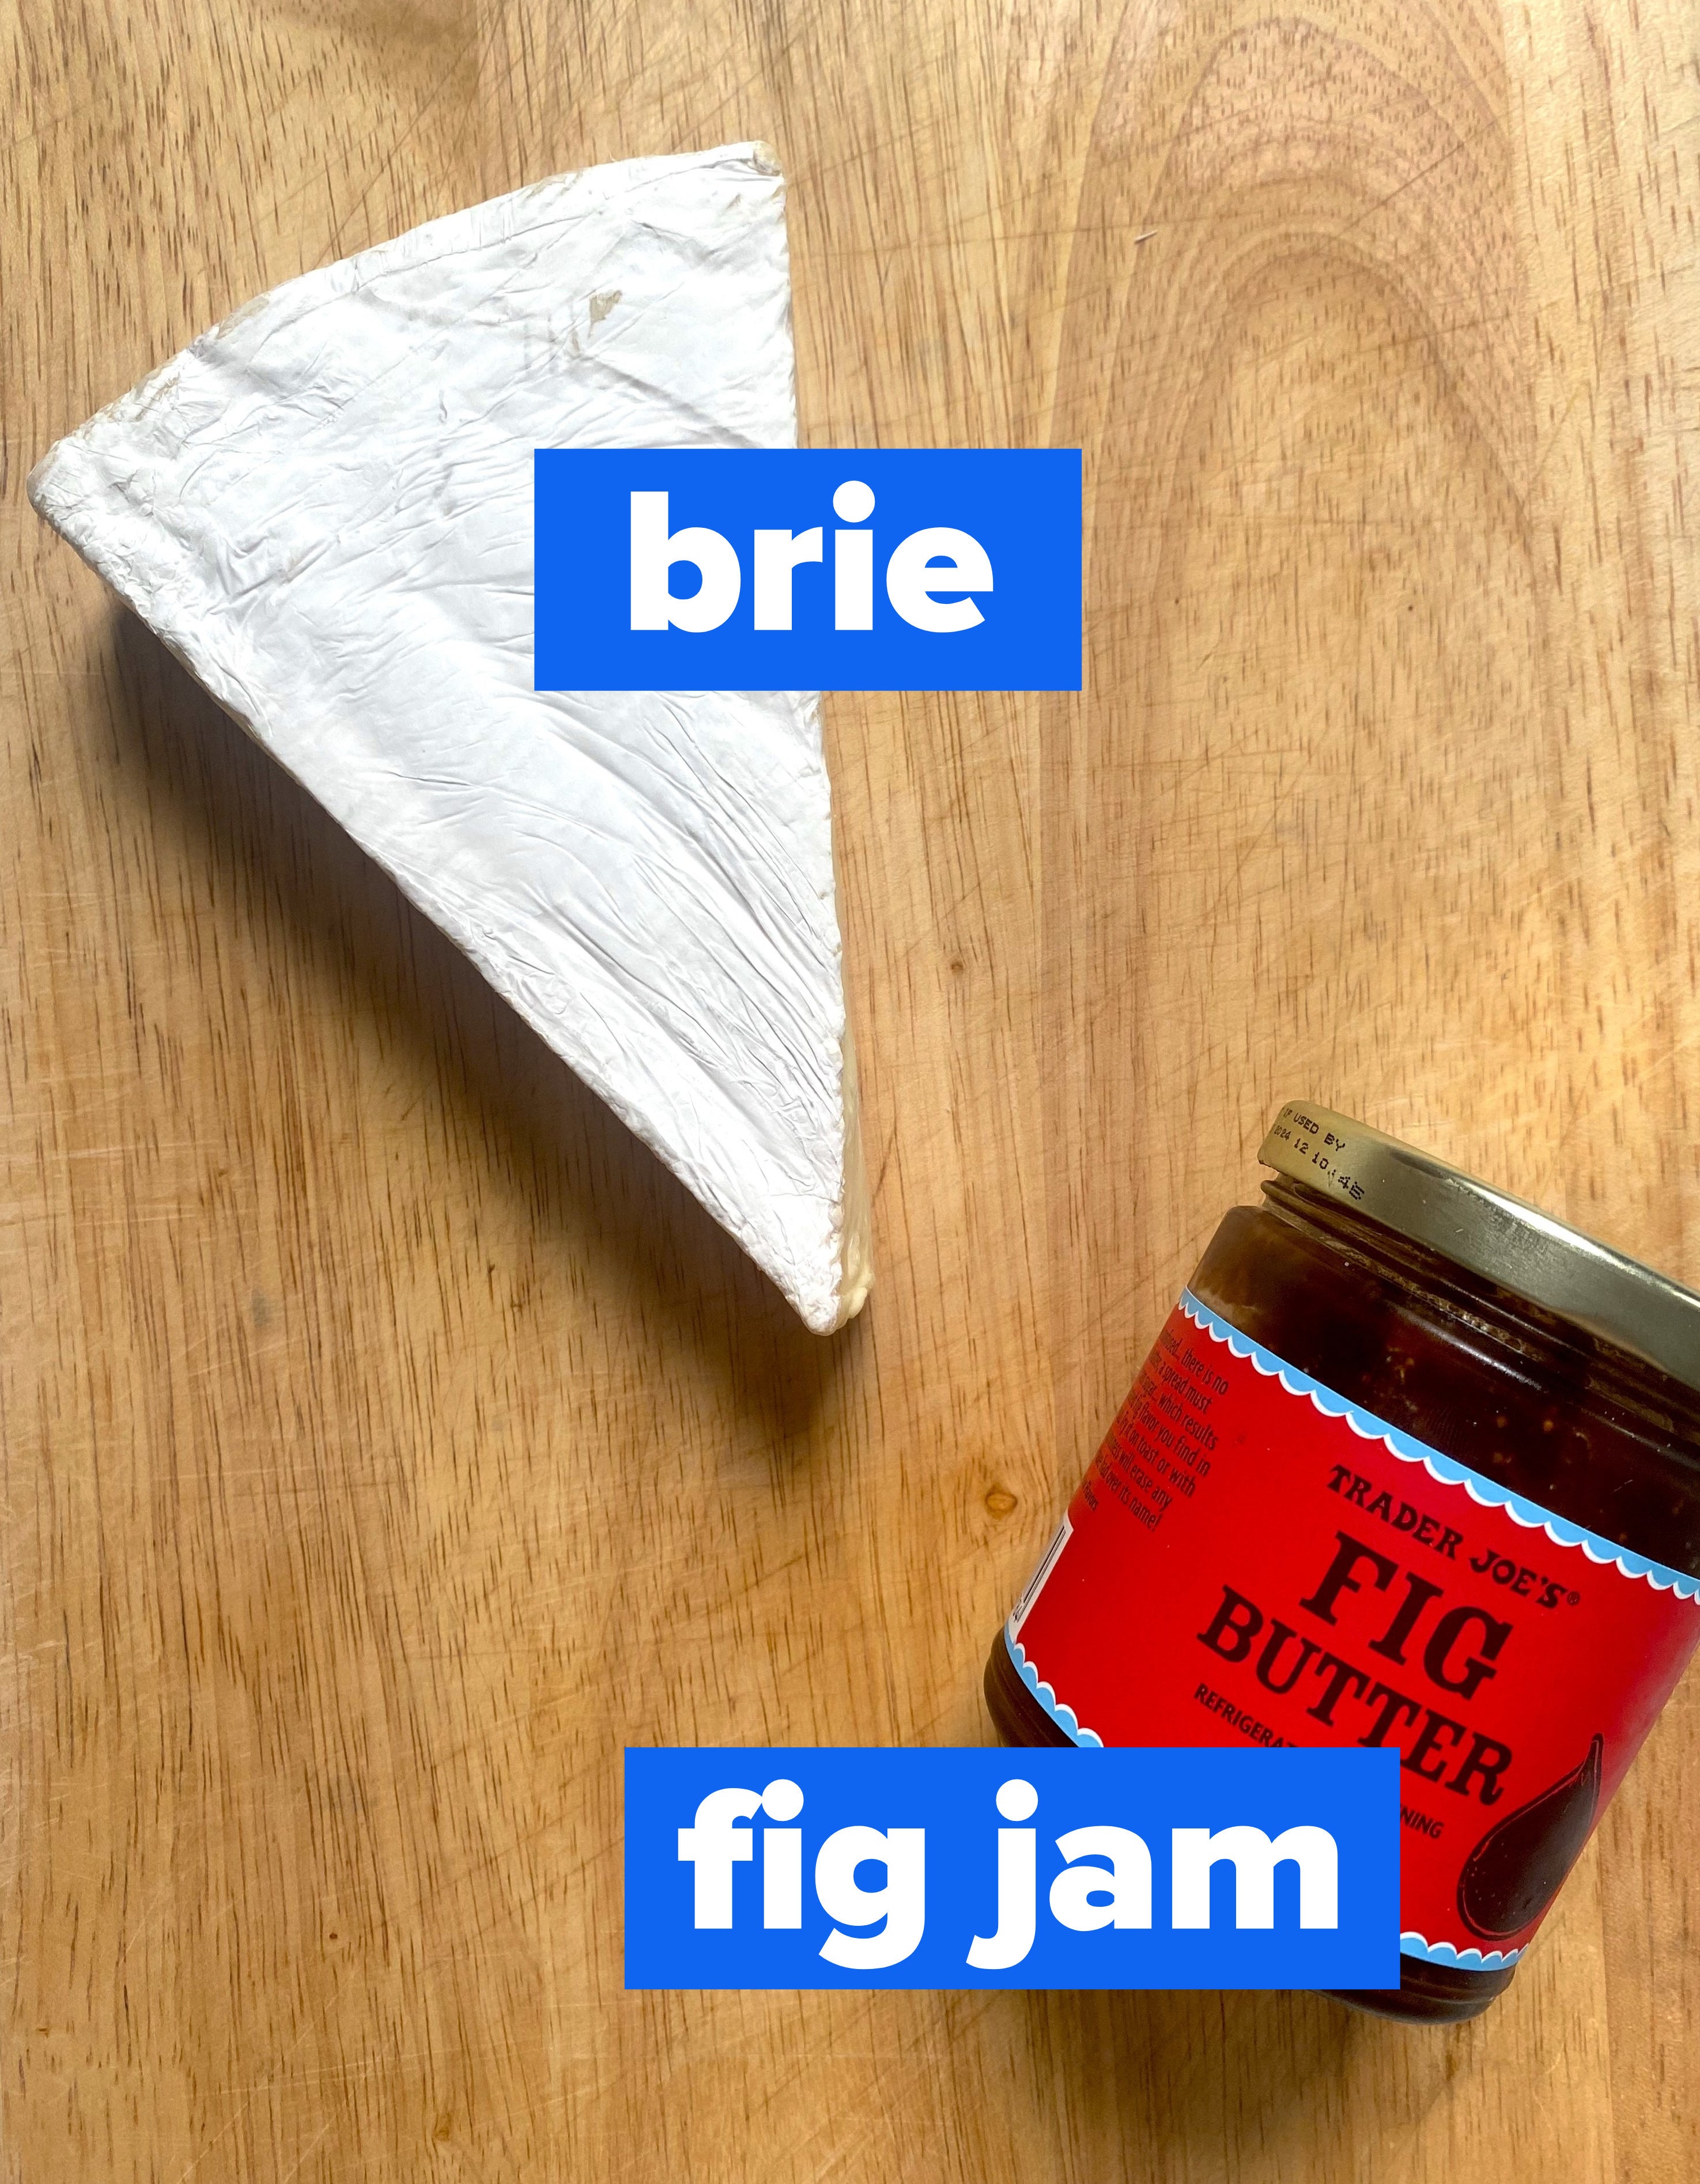 Brie and a jar of fig jam on a cutting board